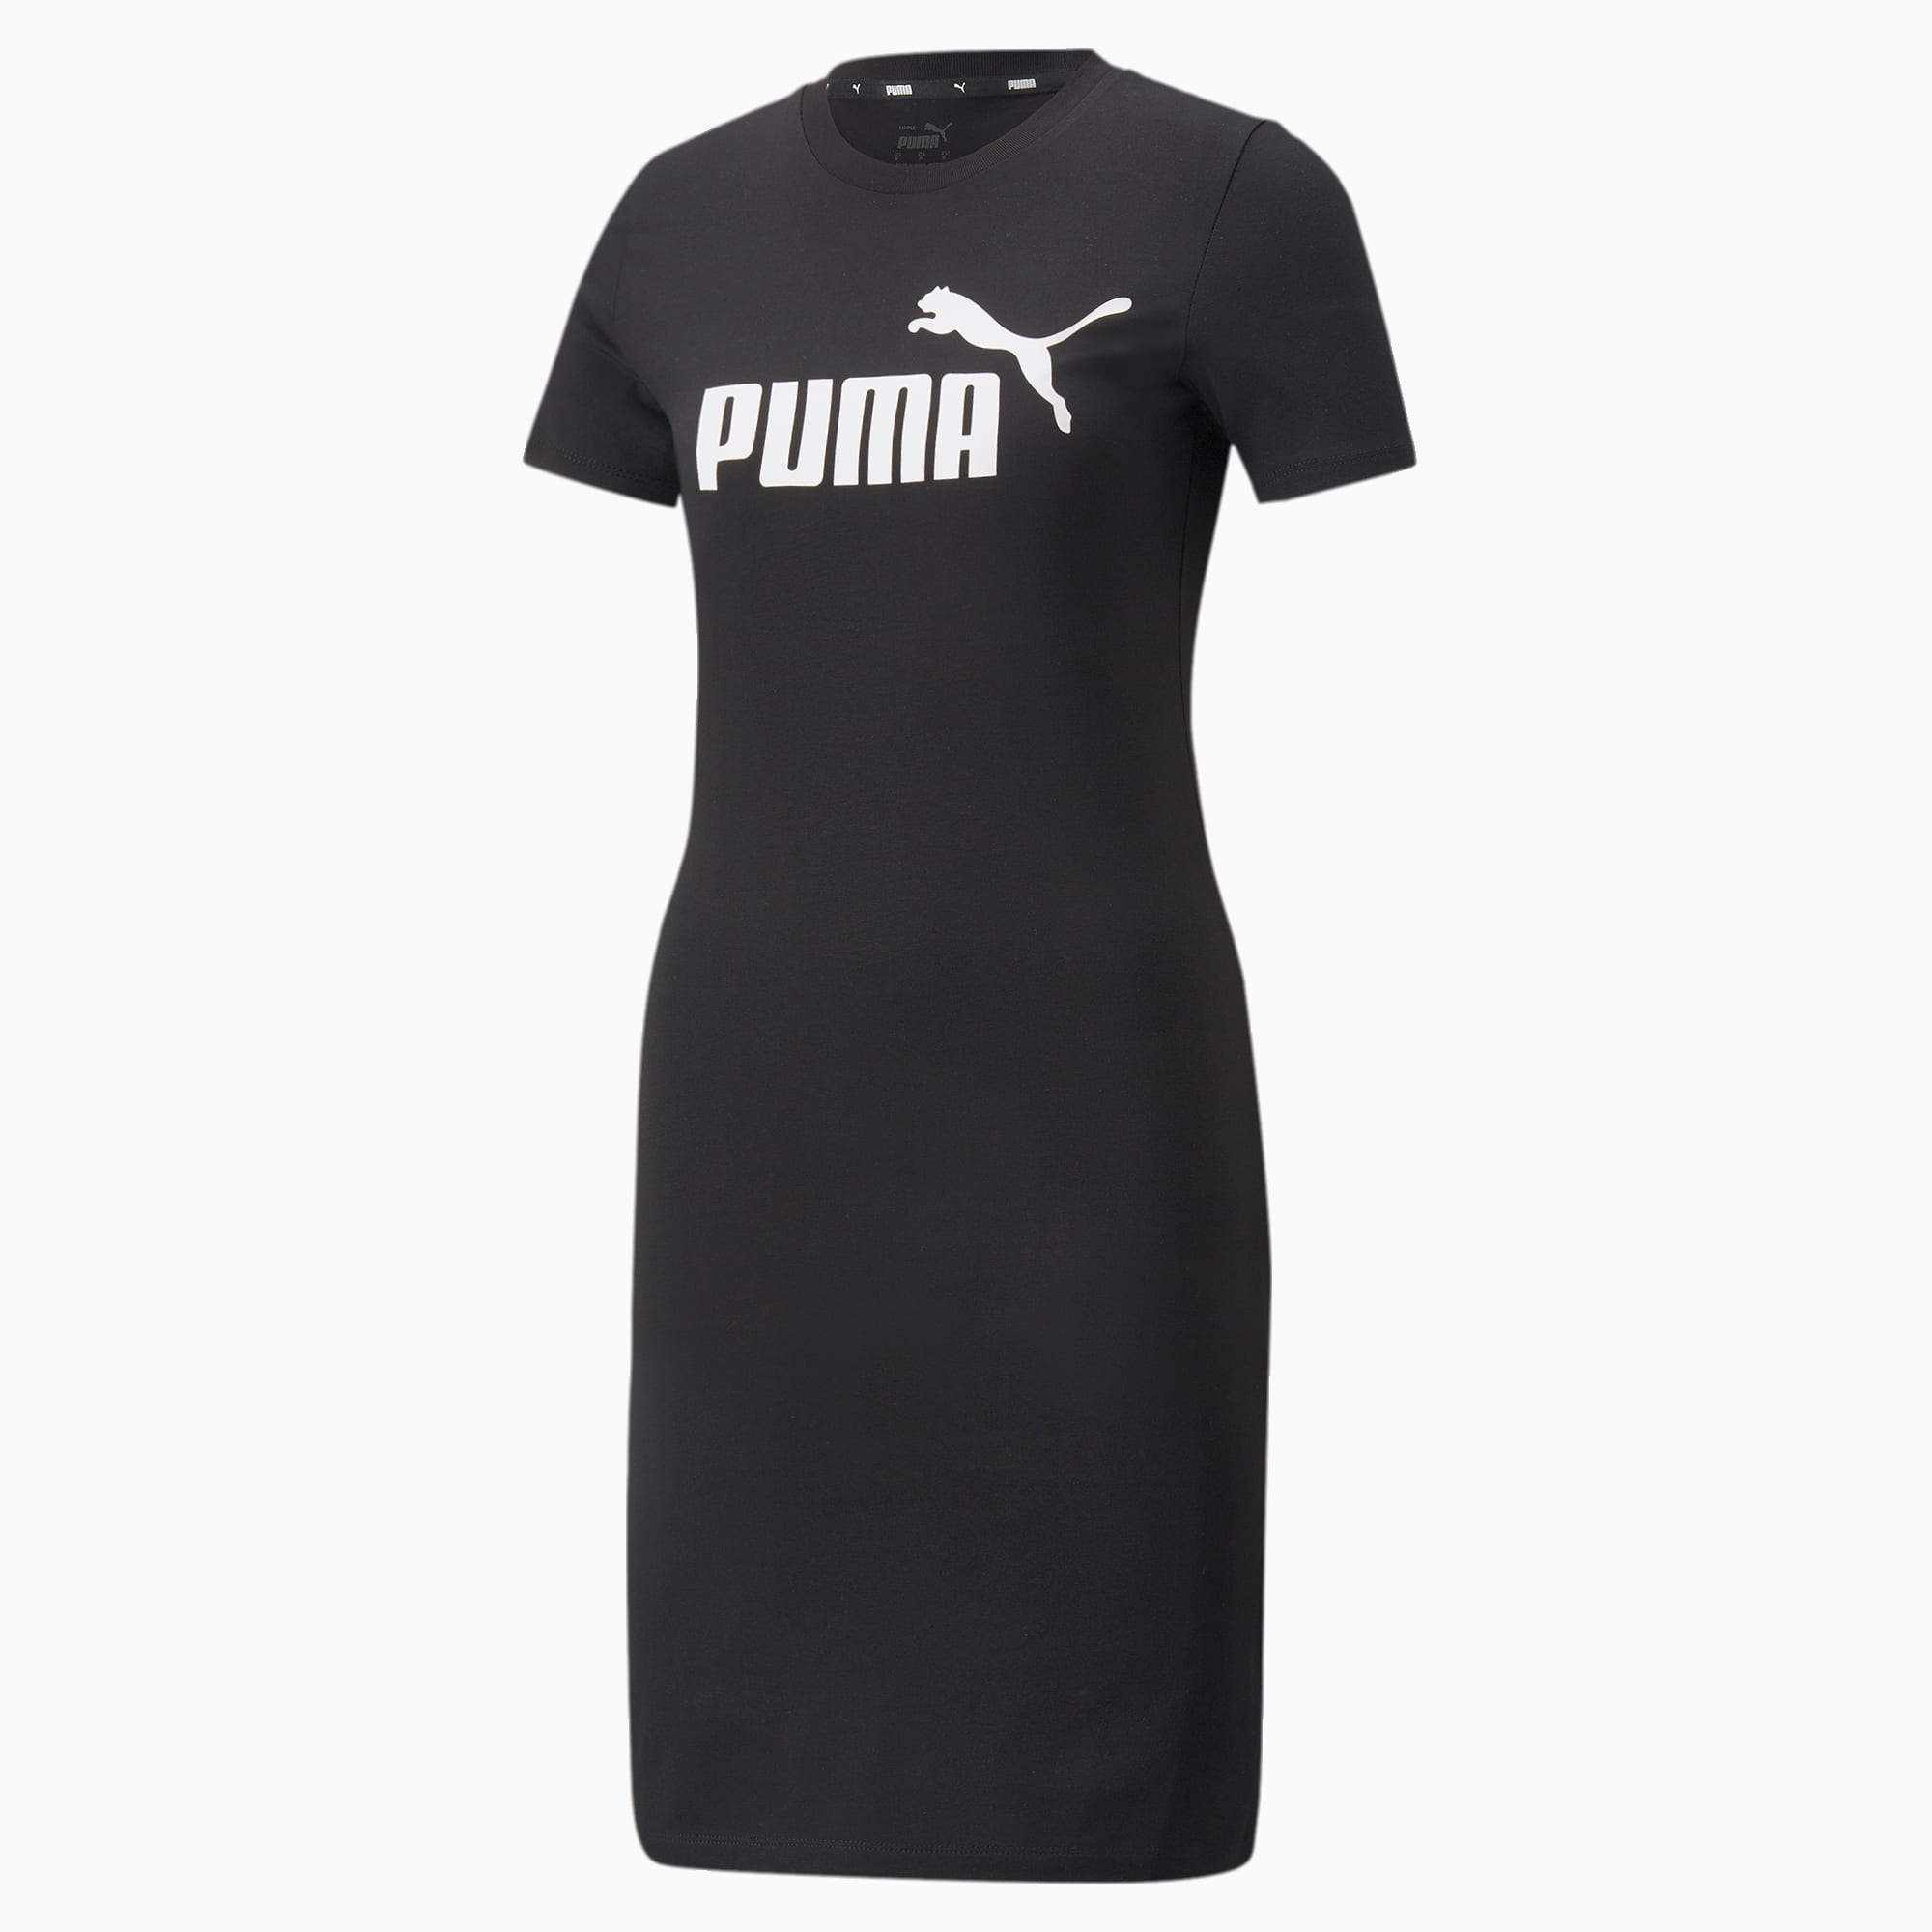 Buy PUMA Black Printed Polyester Slim Fit Womens Active Wear